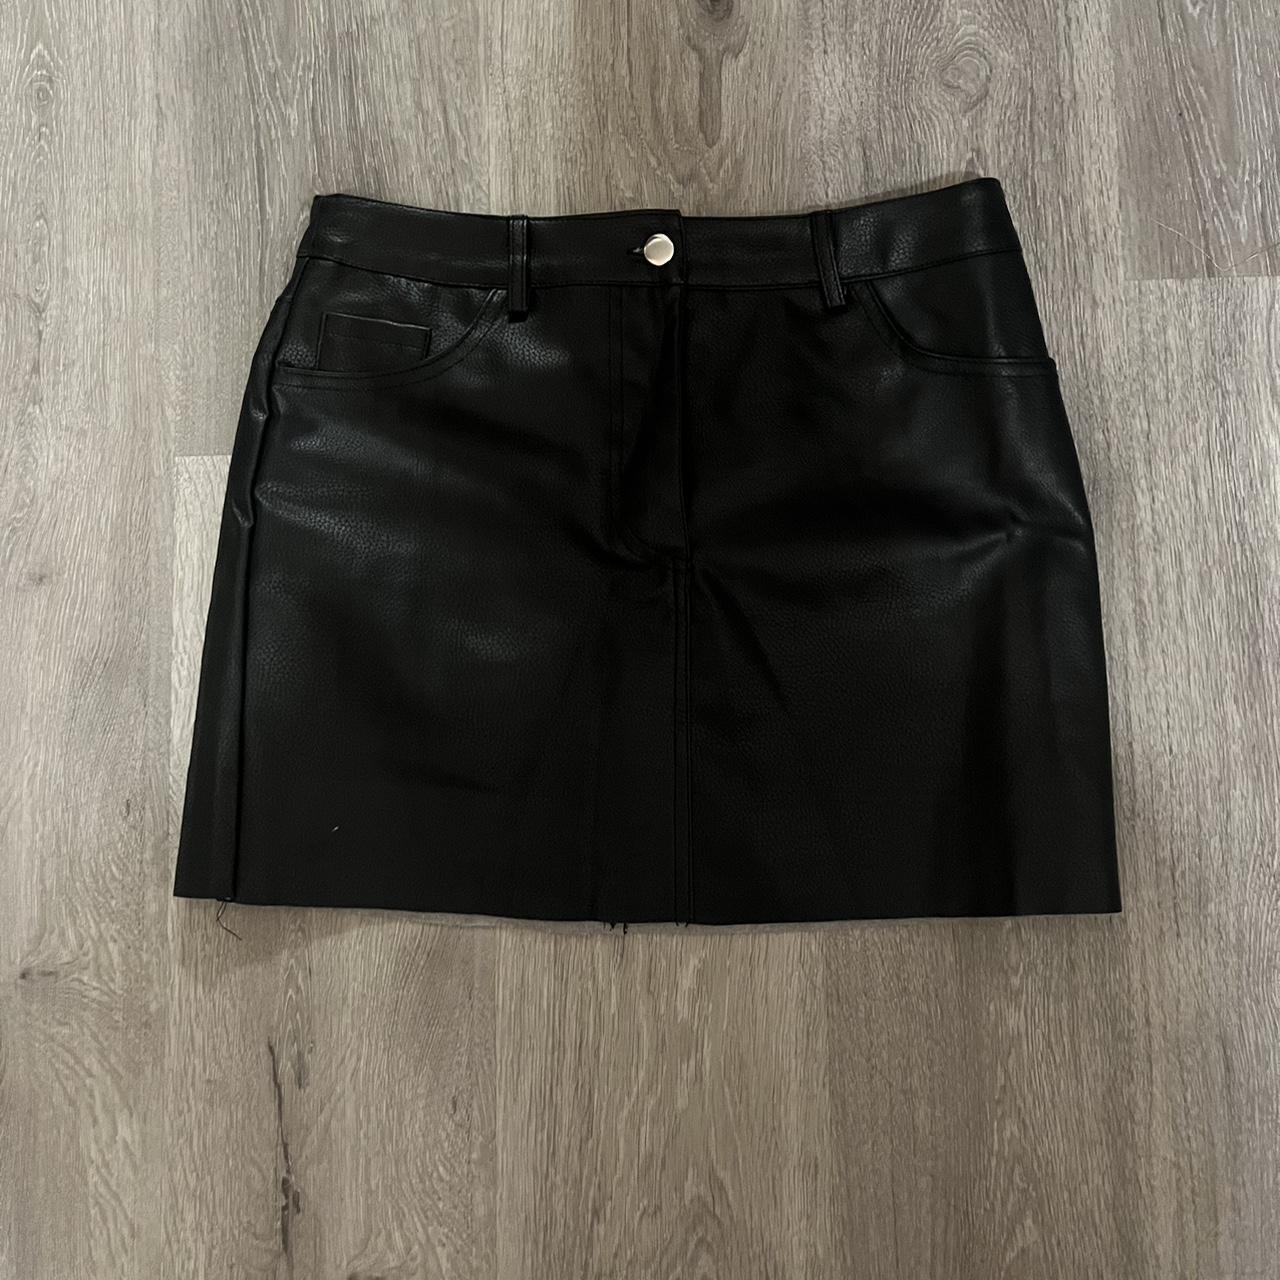 Black Forever 21 leather skirt, new with tags, size L - Depop